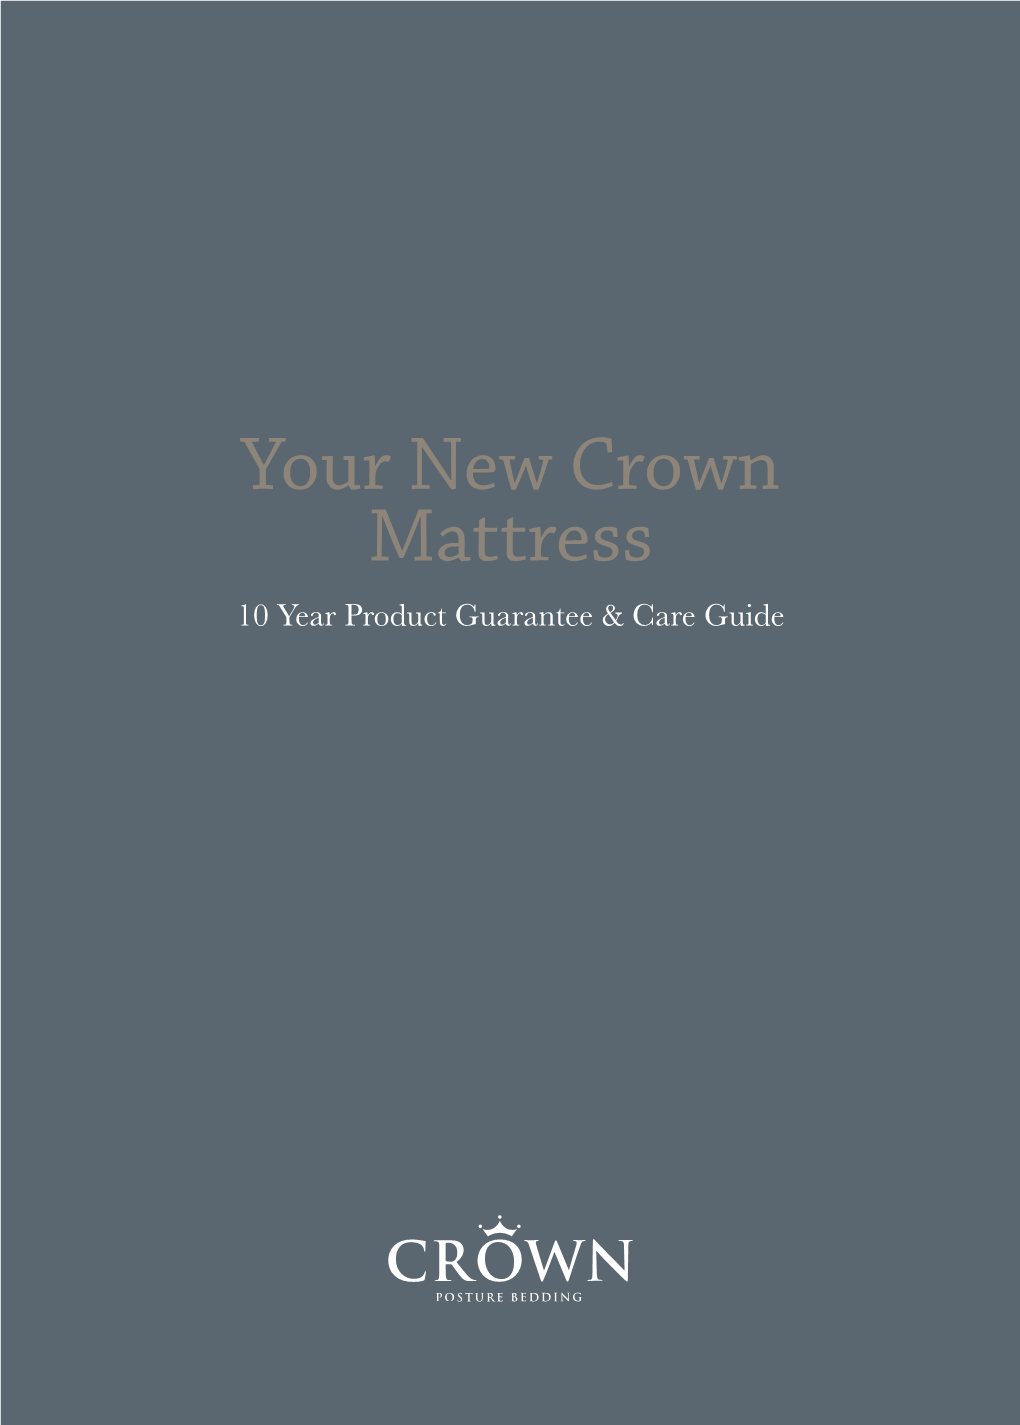 Your New Crown Mattress 10 Year Product Guarantee & Care Guide